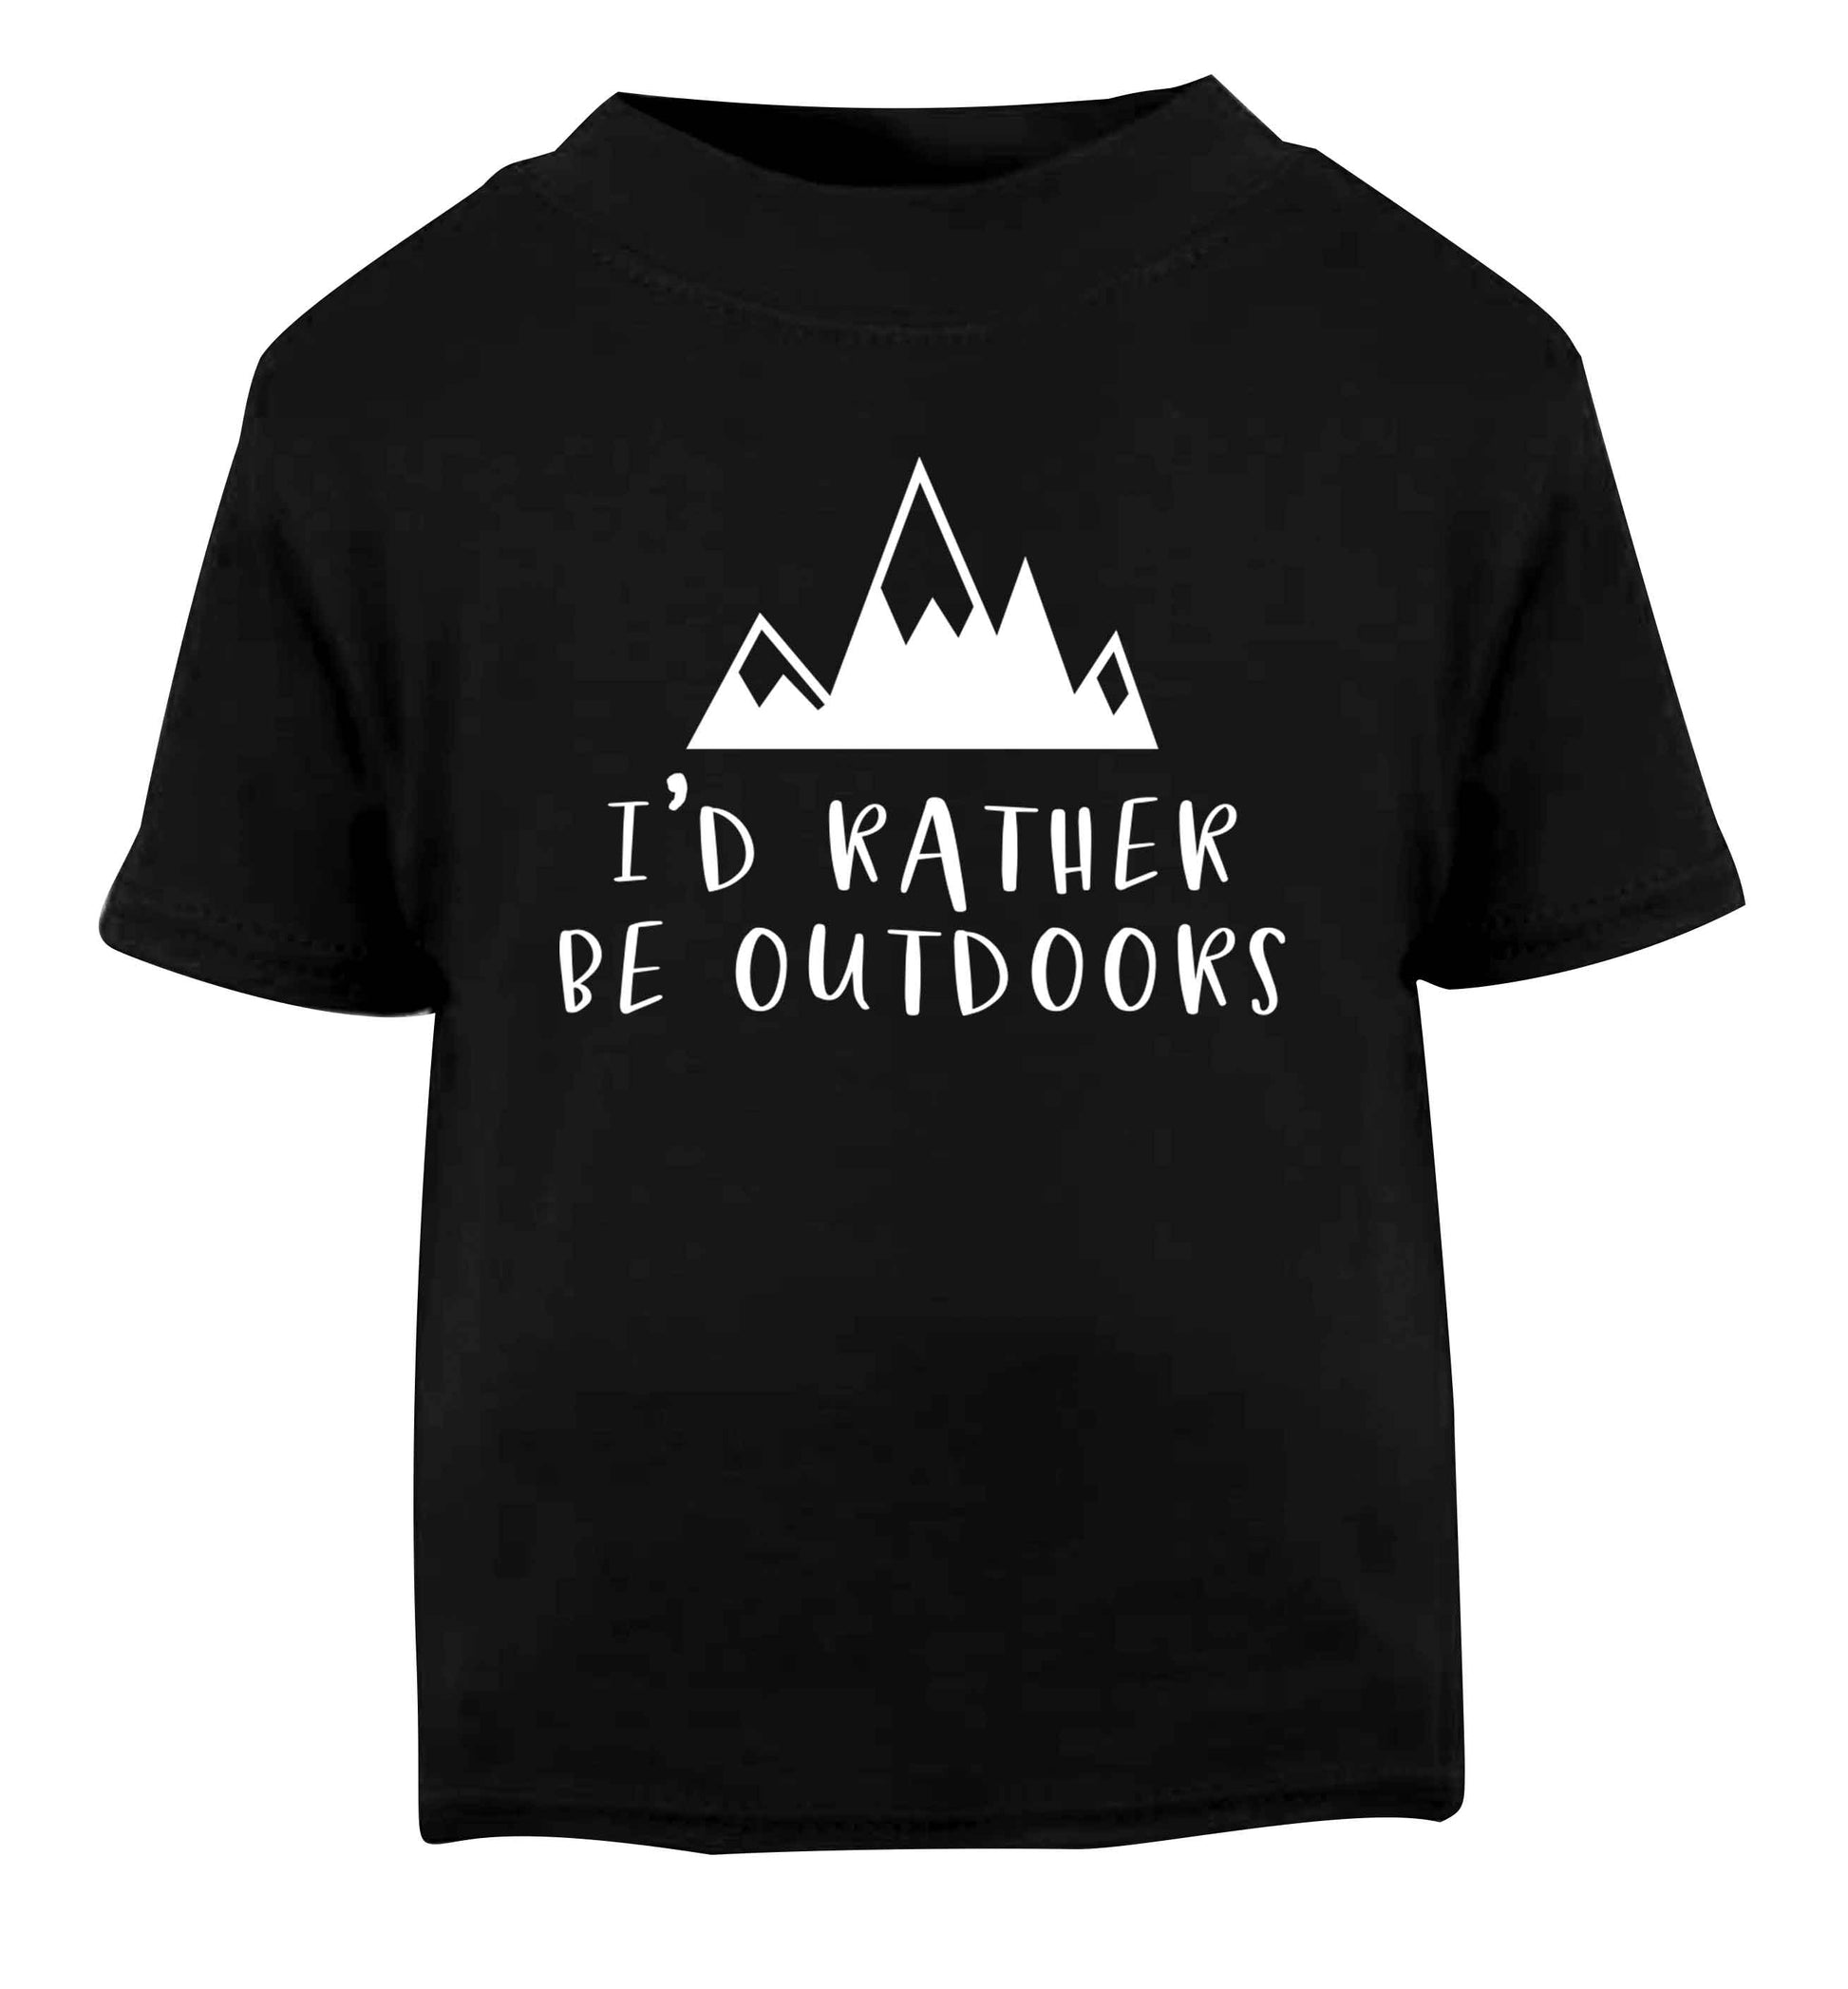 I'd rather be outdoors Black Baby Toddler Tshirt 2 years